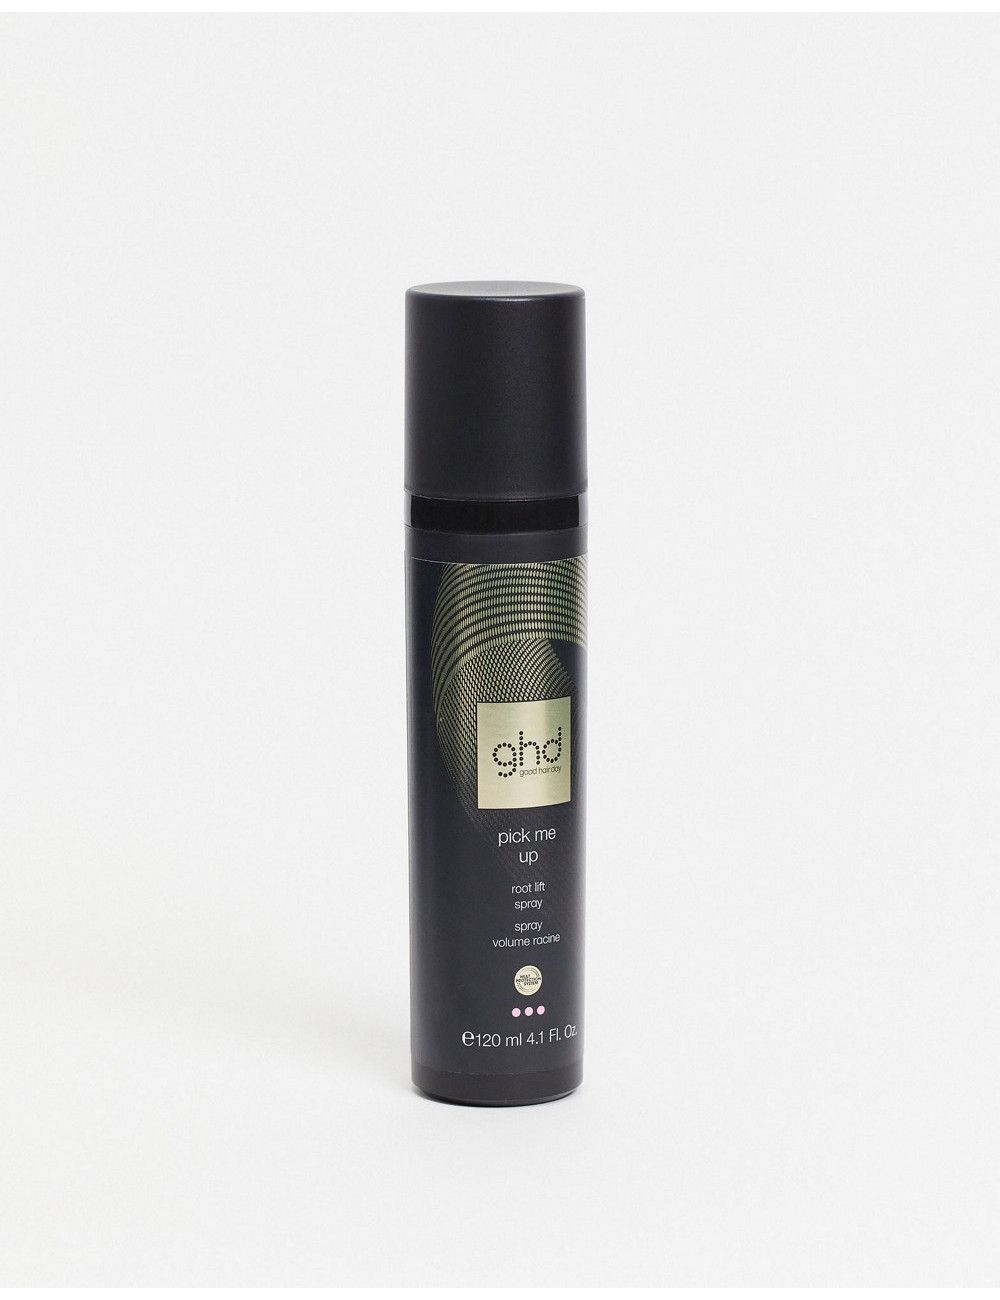 ghd pick me up root lift spray